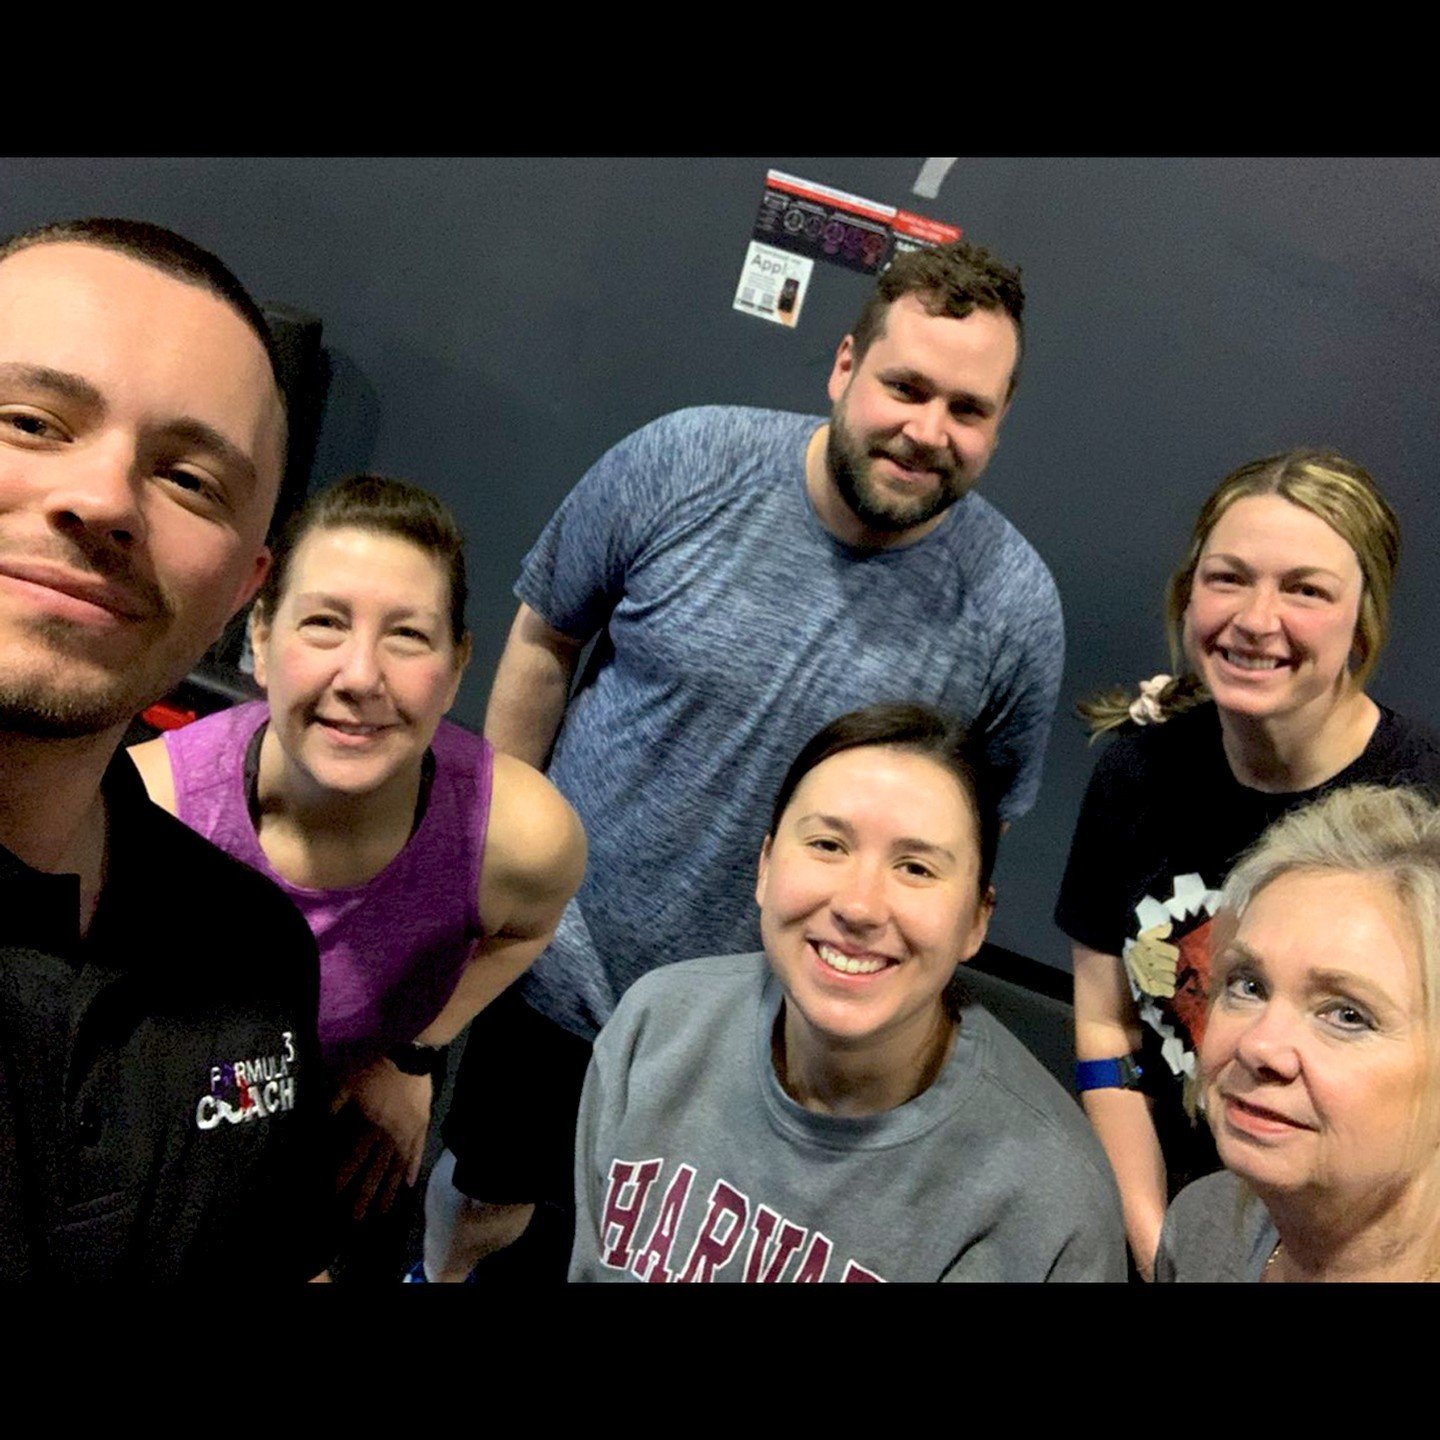 Squad goals achieved! 😍 💪 Nothing beats a killer workout with your crew and an amazing coach! ✨ 
#F3fitFam #WorkoutVibes #FeelingStrong #FitnessCommunity #SupportSystem #GetFitTogether
We love seeing the friendships blossom and goals being crushed 